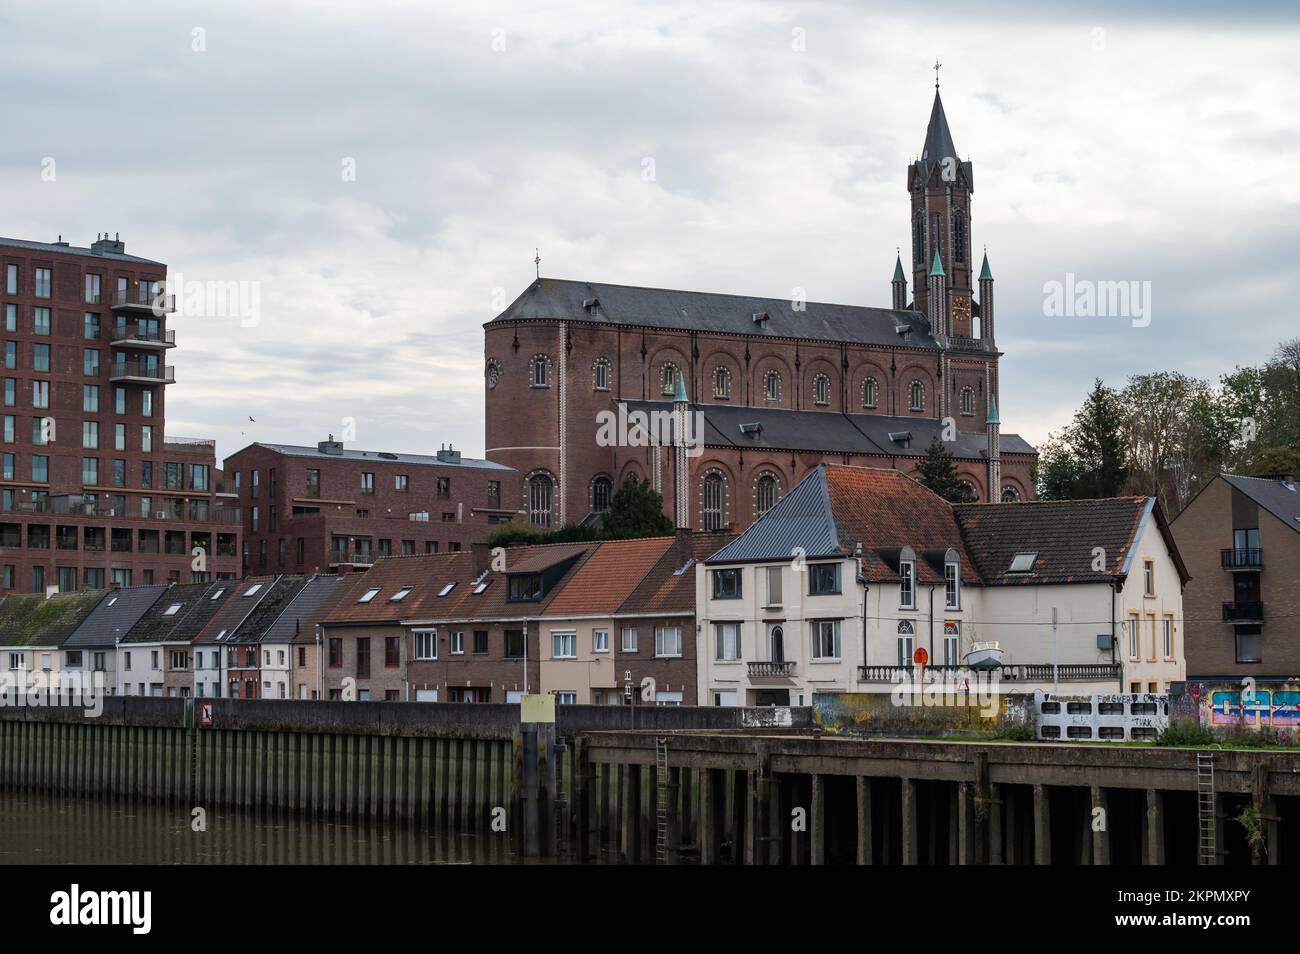 Wetteren, East Flemish Region, Belgium, 11 03 2022 - View over the village, apartment blocks and church from the banks of the River Scheldt Stock Photo